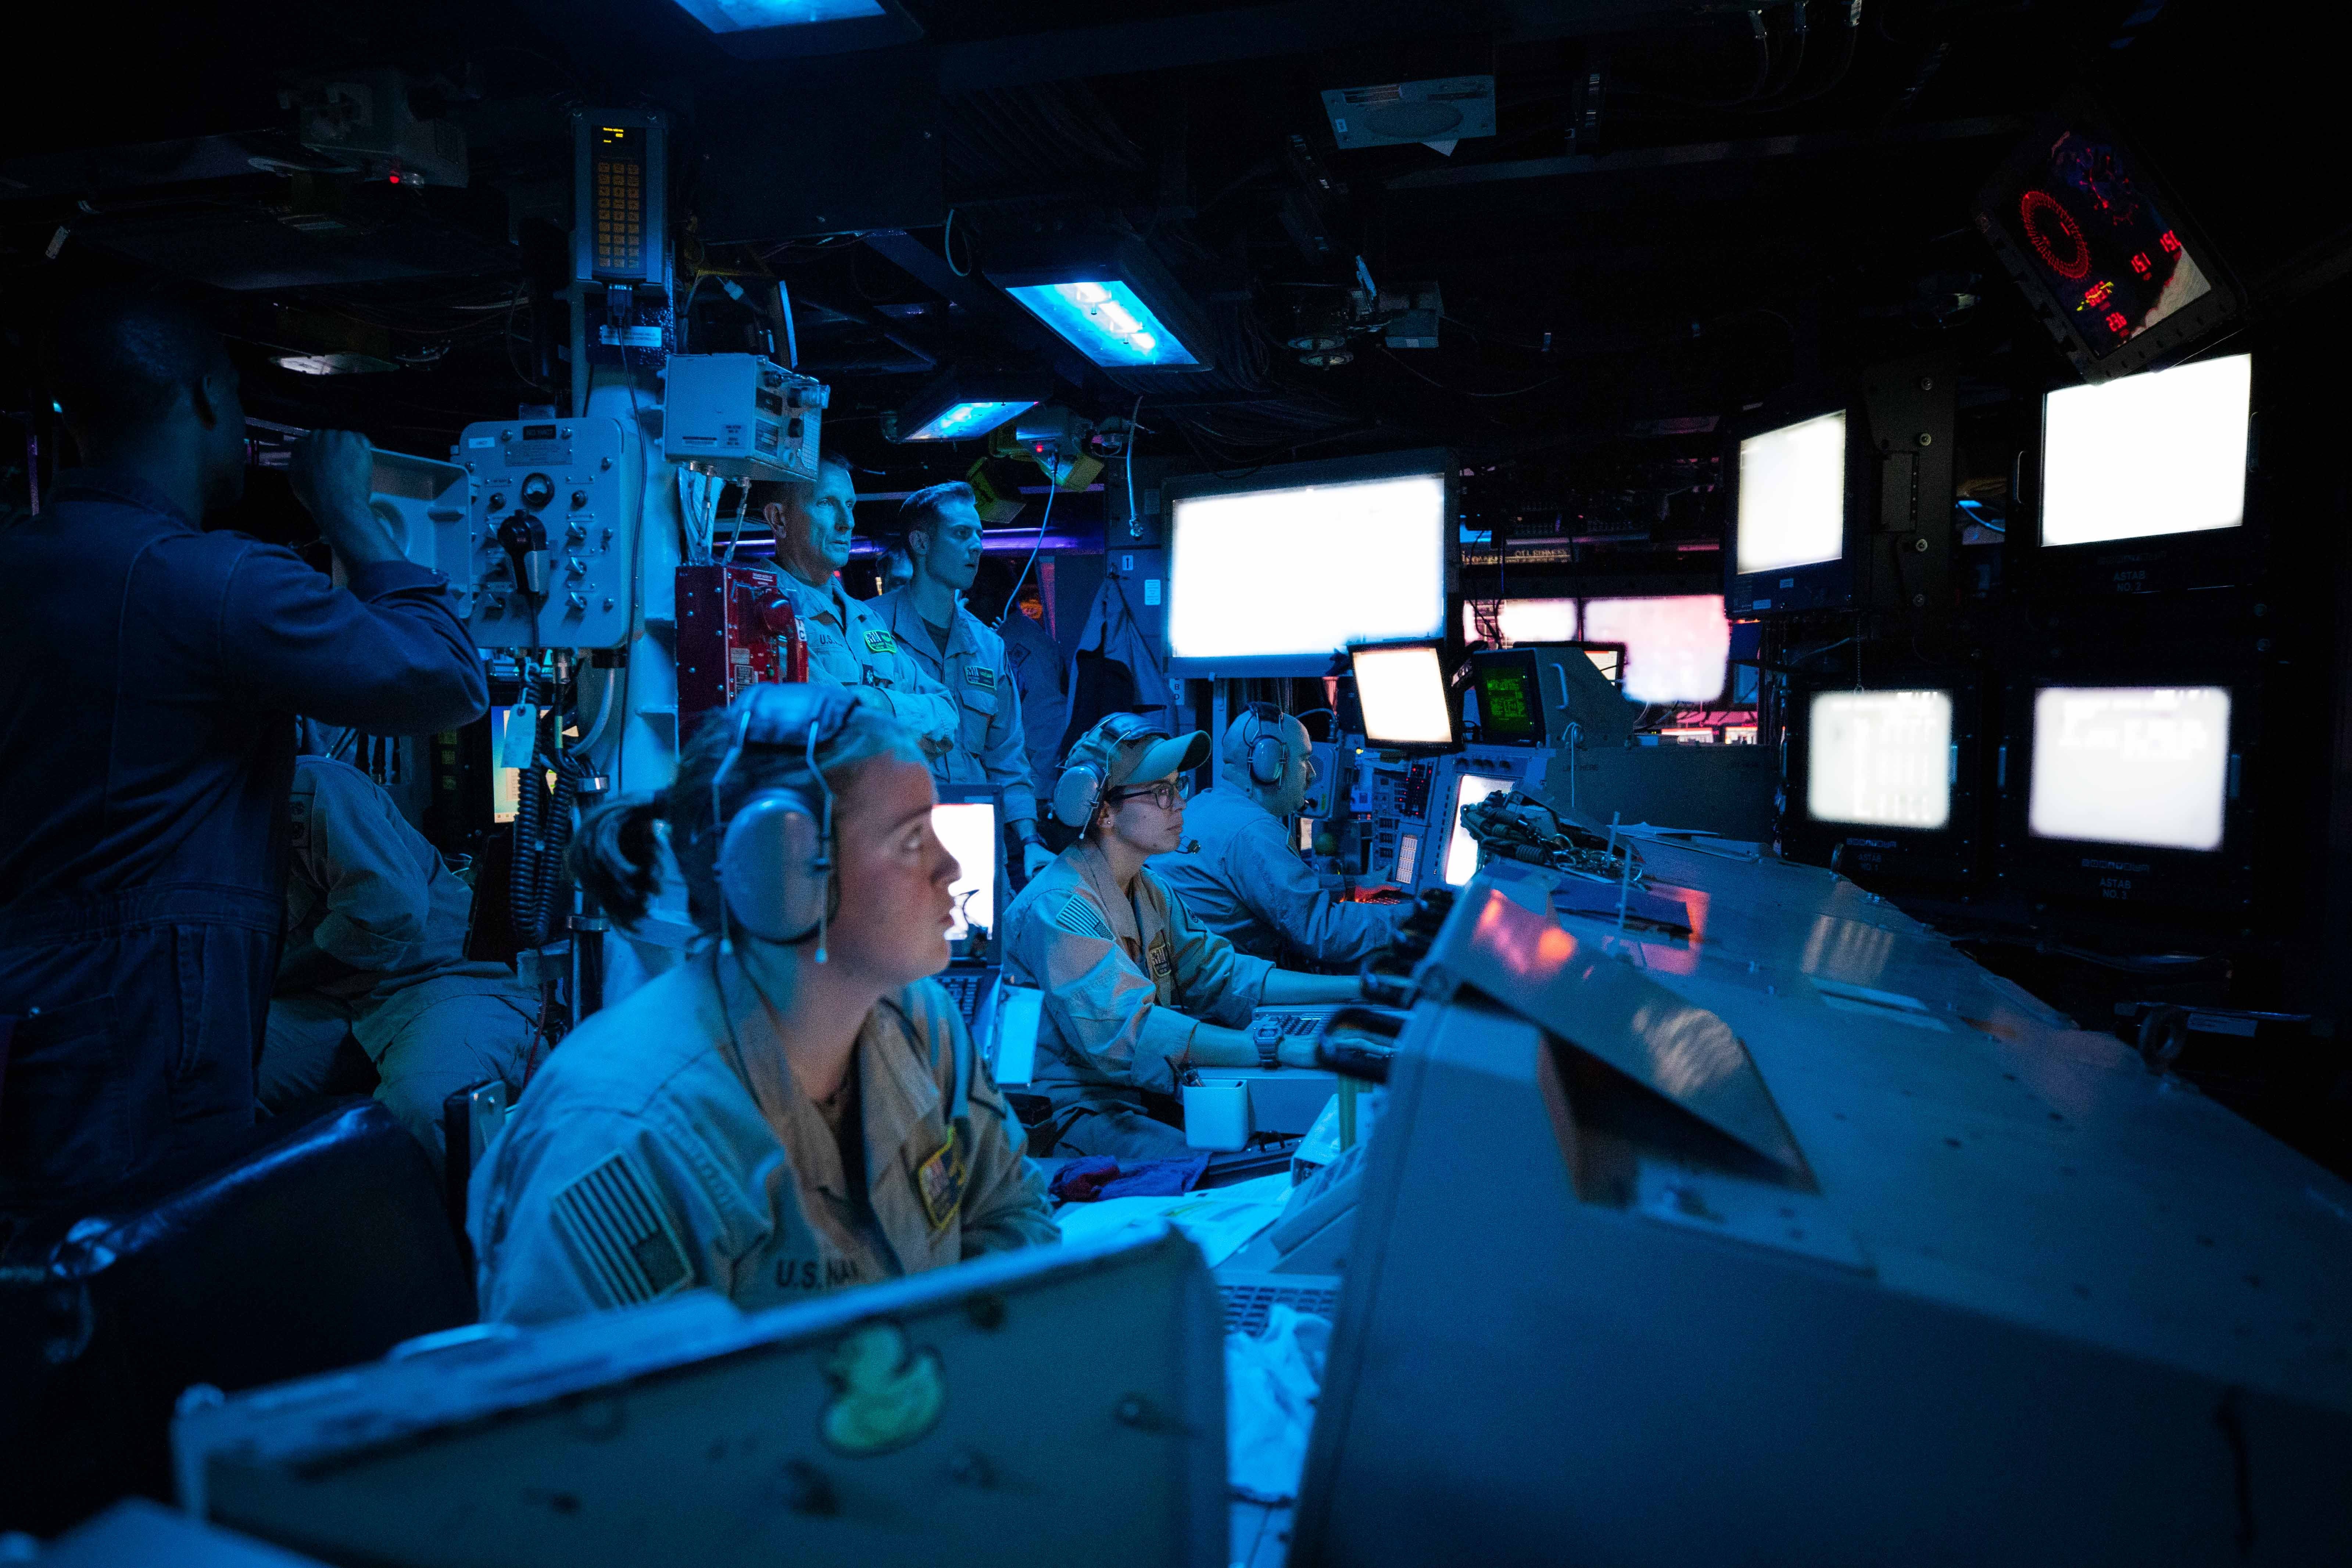  The U.S. 5th Fleet area of operations to help ensure maritime security and stability in the Middle East region.